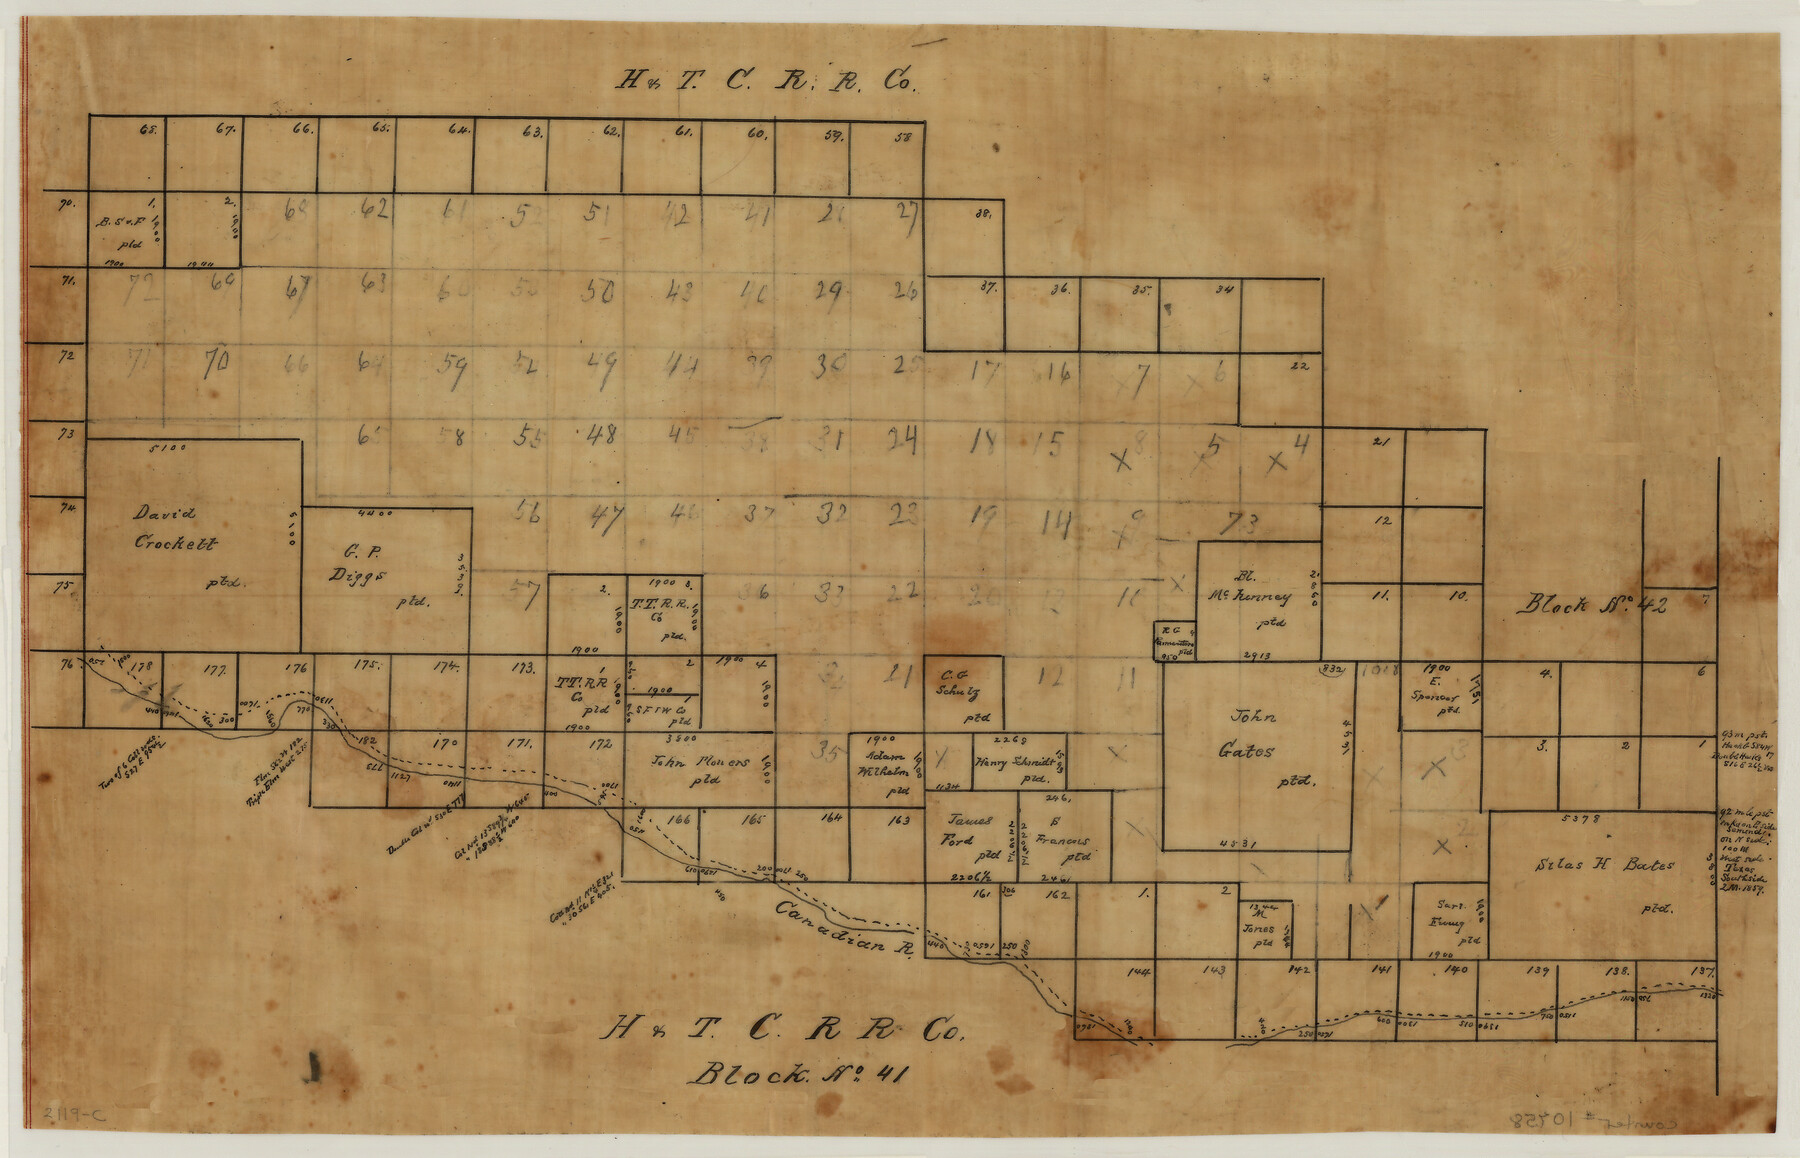 10758, [Sketch of H & T C RR Co. Blocks north of the Canadian River, Hemphill County, Texas], Maddox Collection